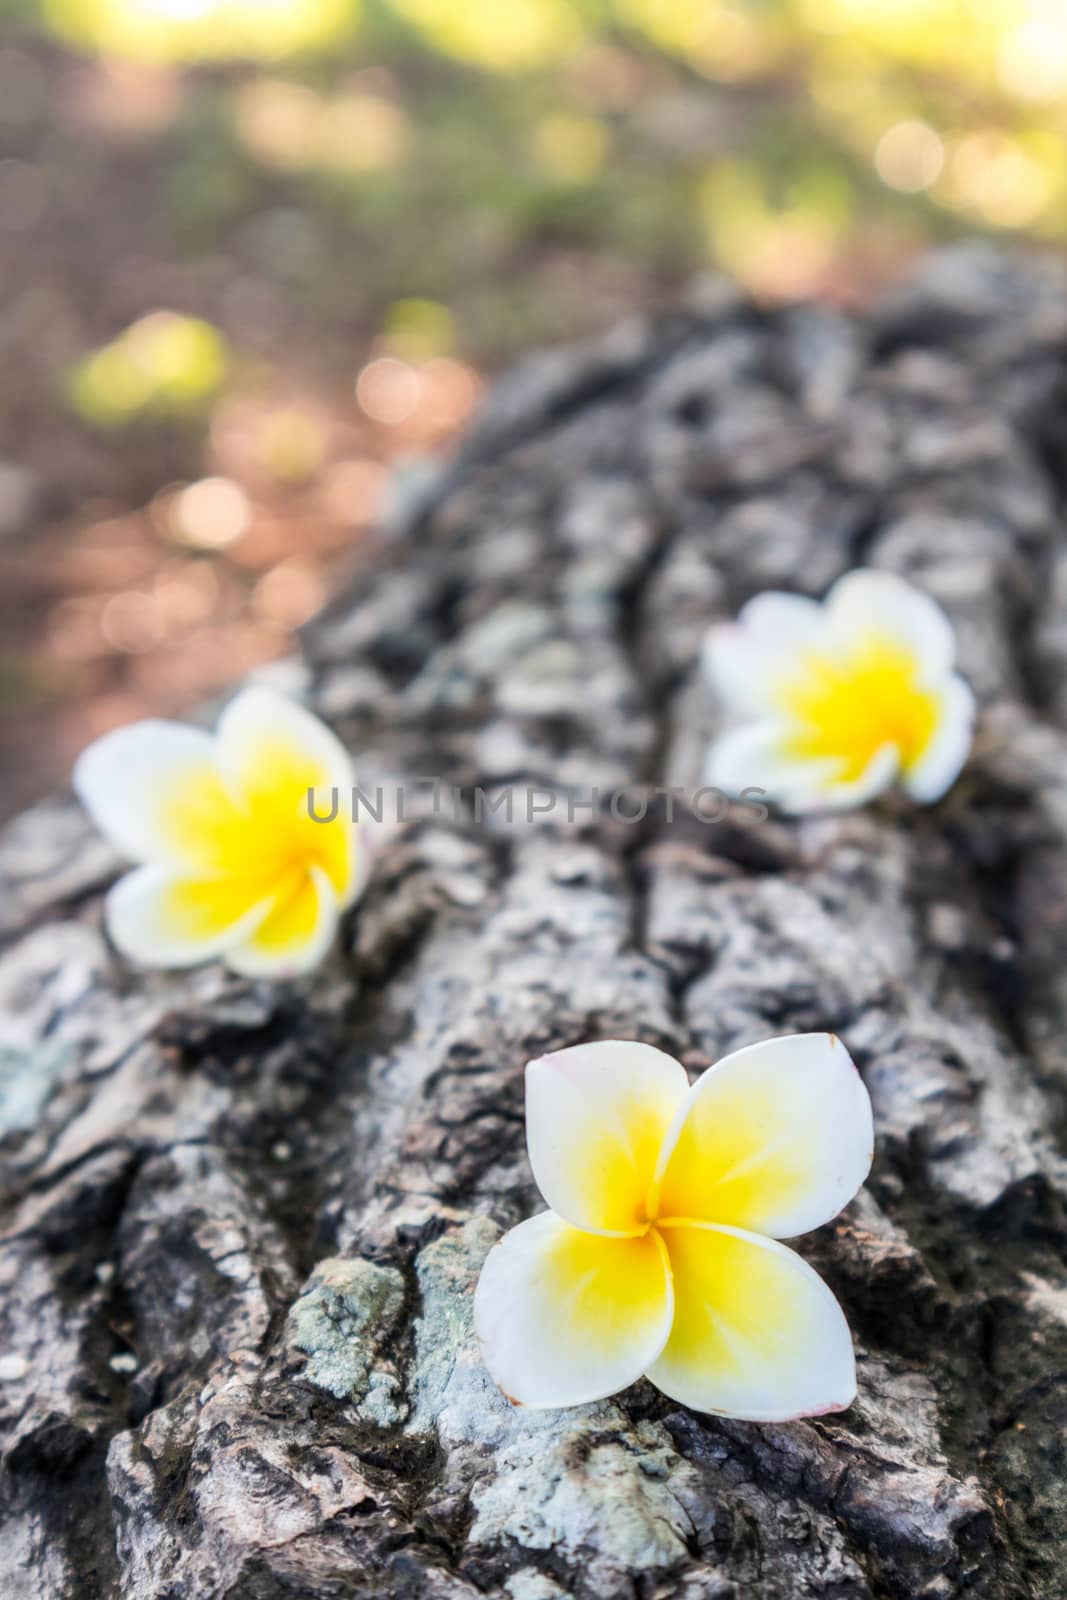 Plumeria on old wood background with sunlight at morning, selective focus